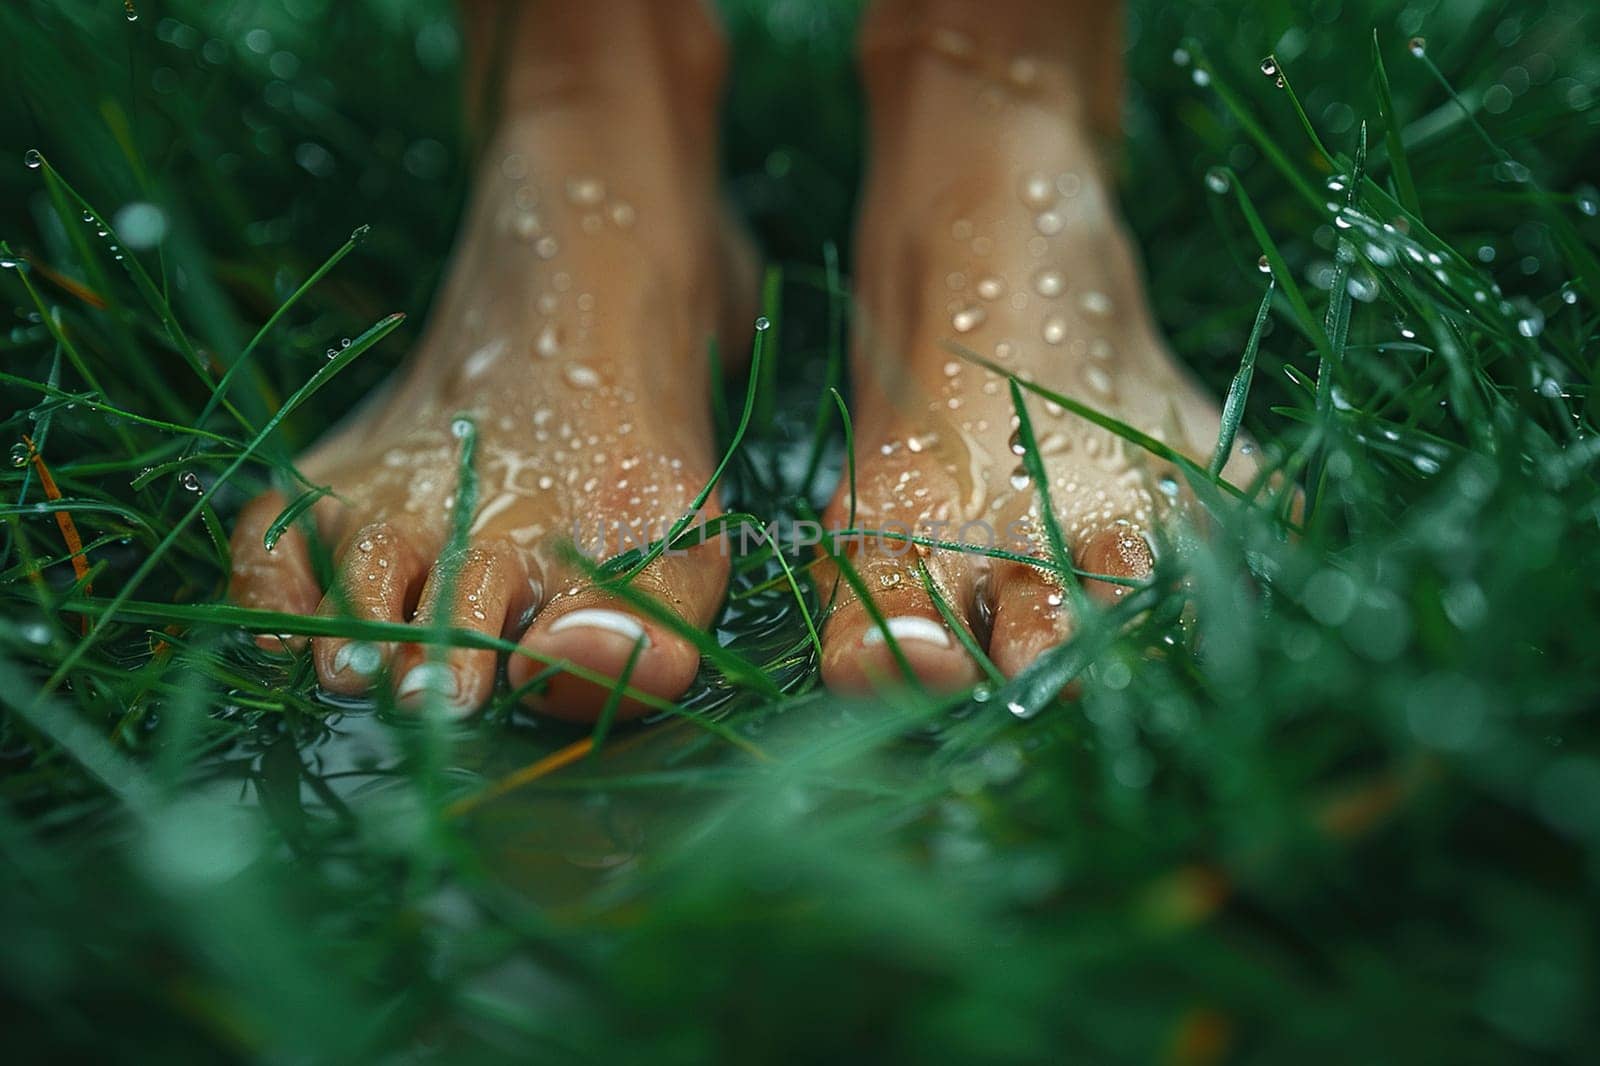 Beautiful female feet on lush grass with dew drops, shot from ground level.